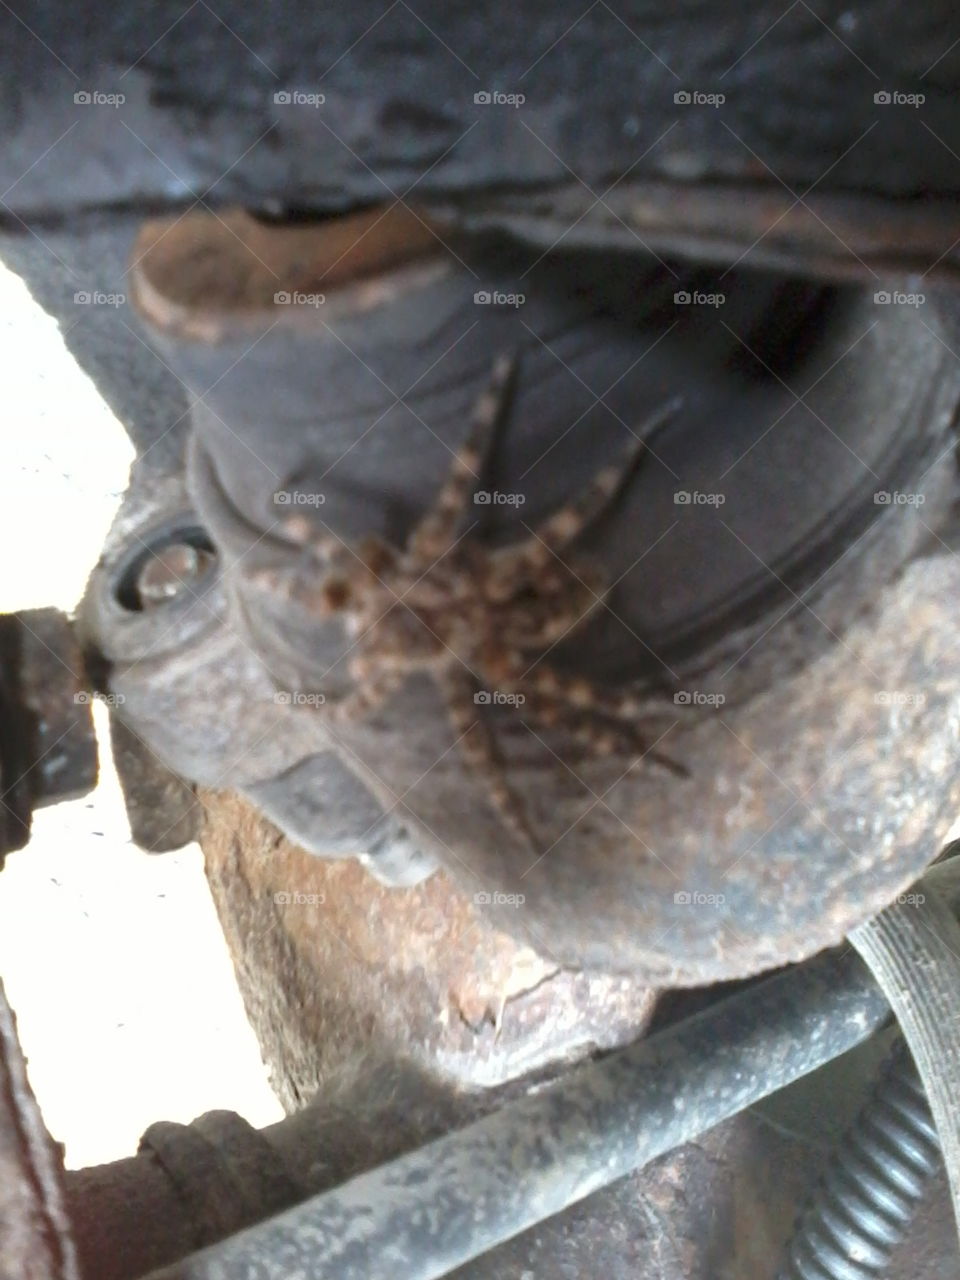 giant spider. hubby was fixing the jeep and found this been there for awhile